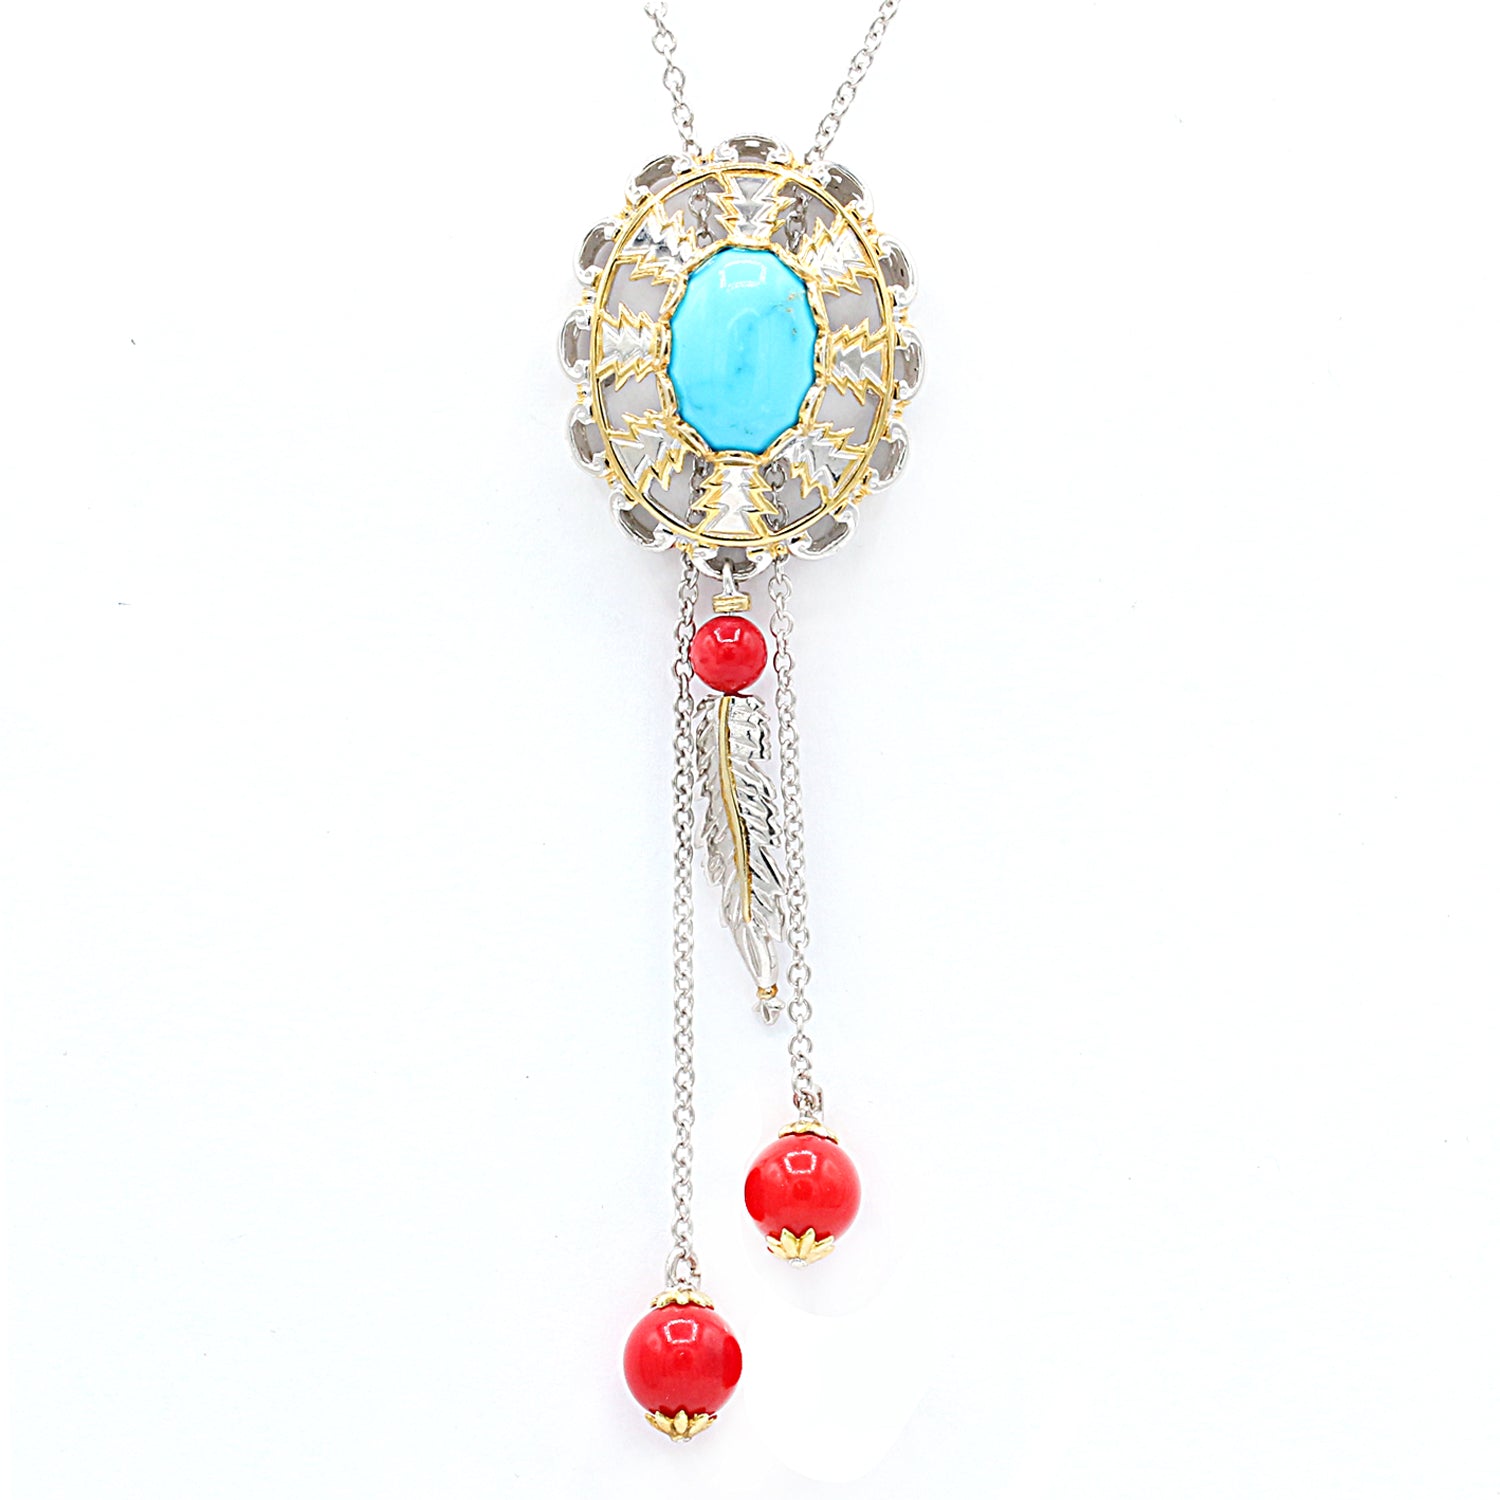 Gems en Vogue One-of-a-kind Kingman Turquoise & Red Coral Bolo Tie Necklace